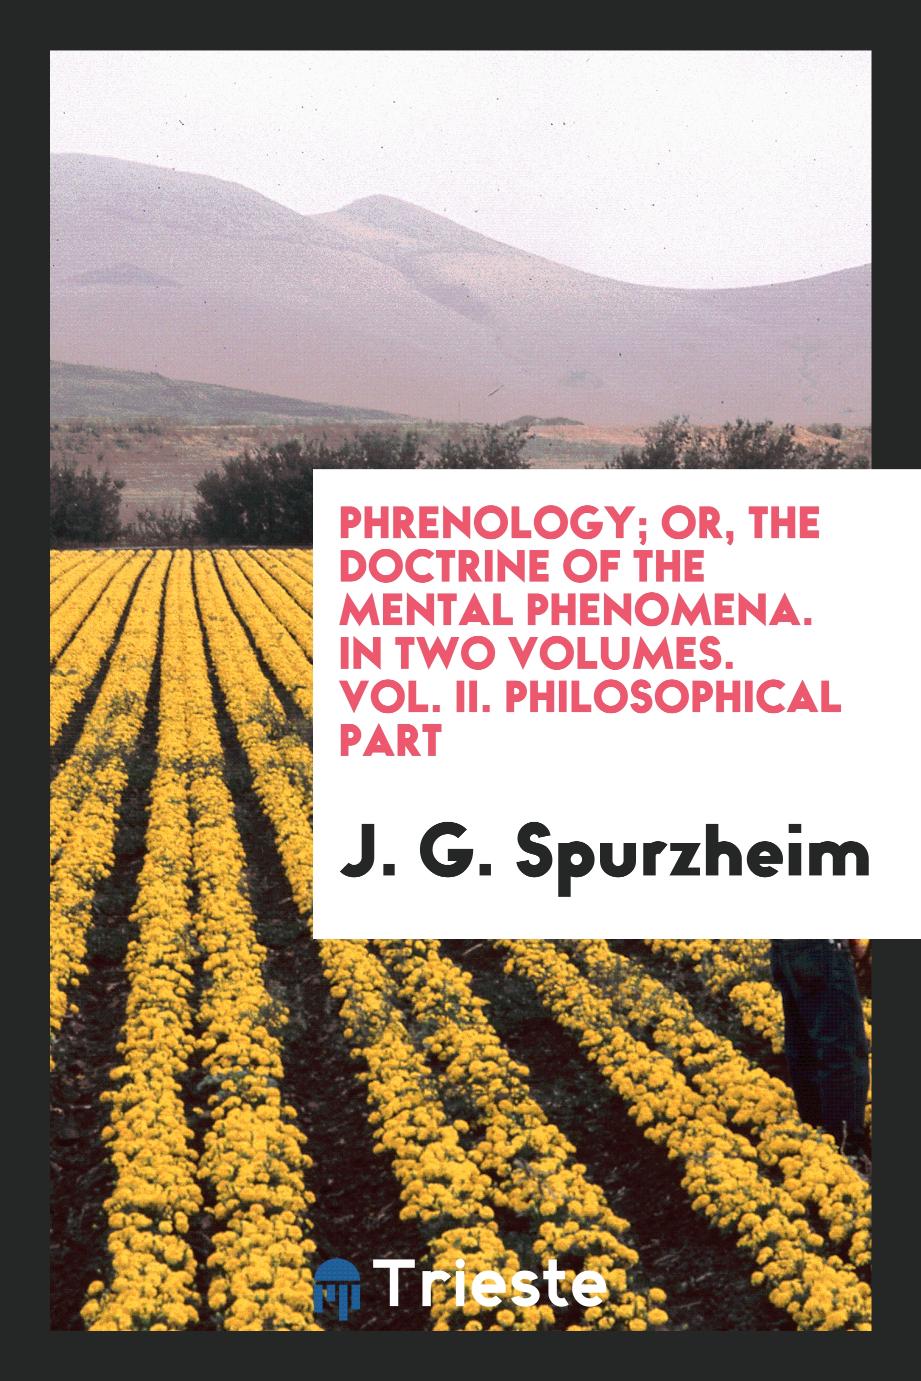 Phrenology; Or, The Doctrine of the Mental Phenomena. In Two Volumes. Vol. II. Philosophical Part